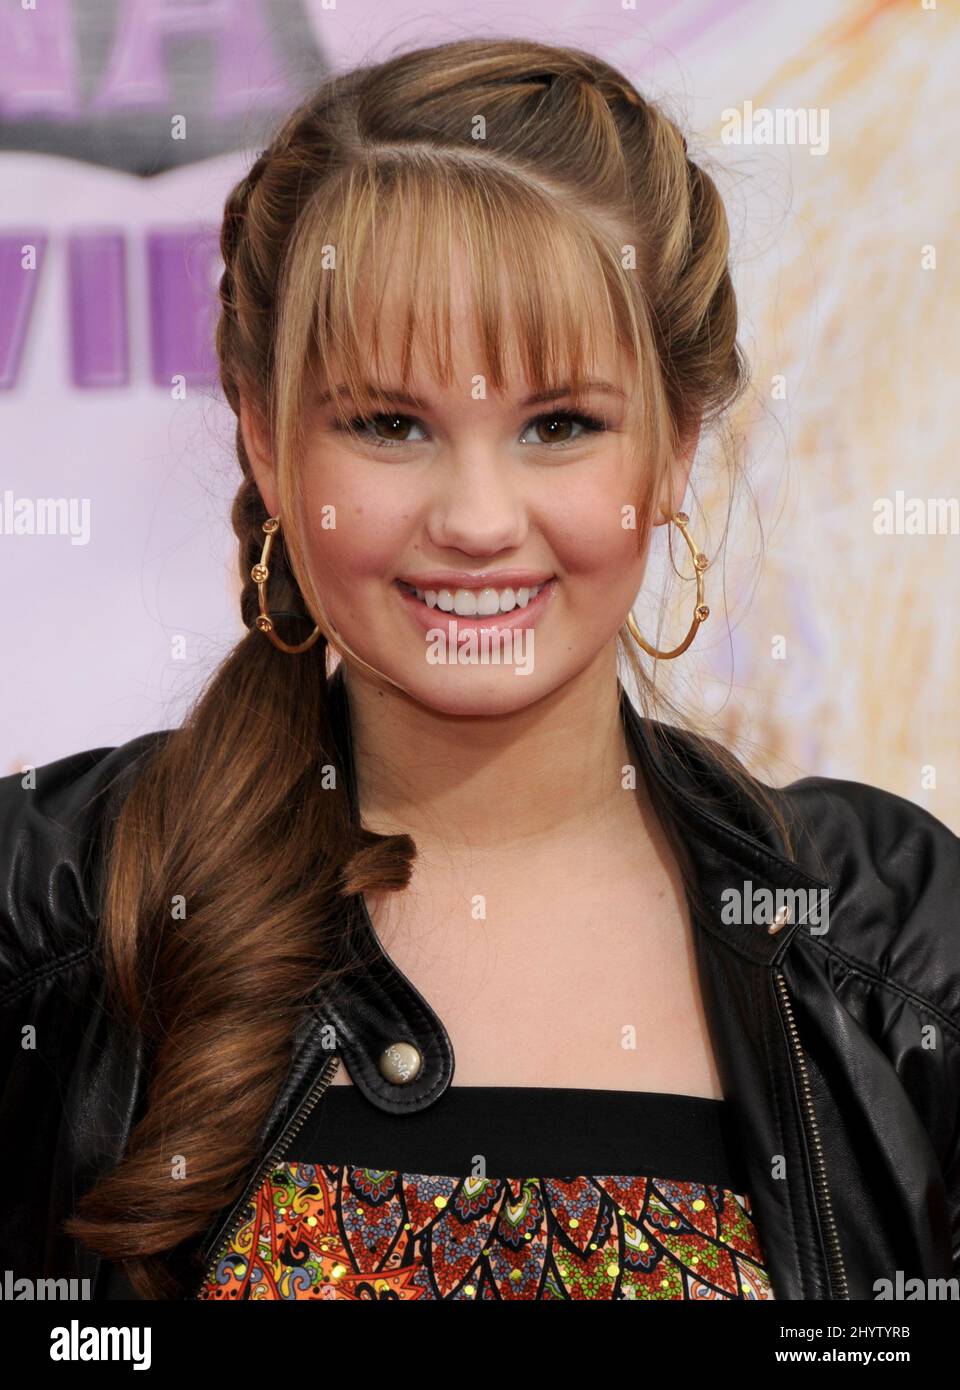 Debby ryan hannah montana hires stock photography and images Alamy